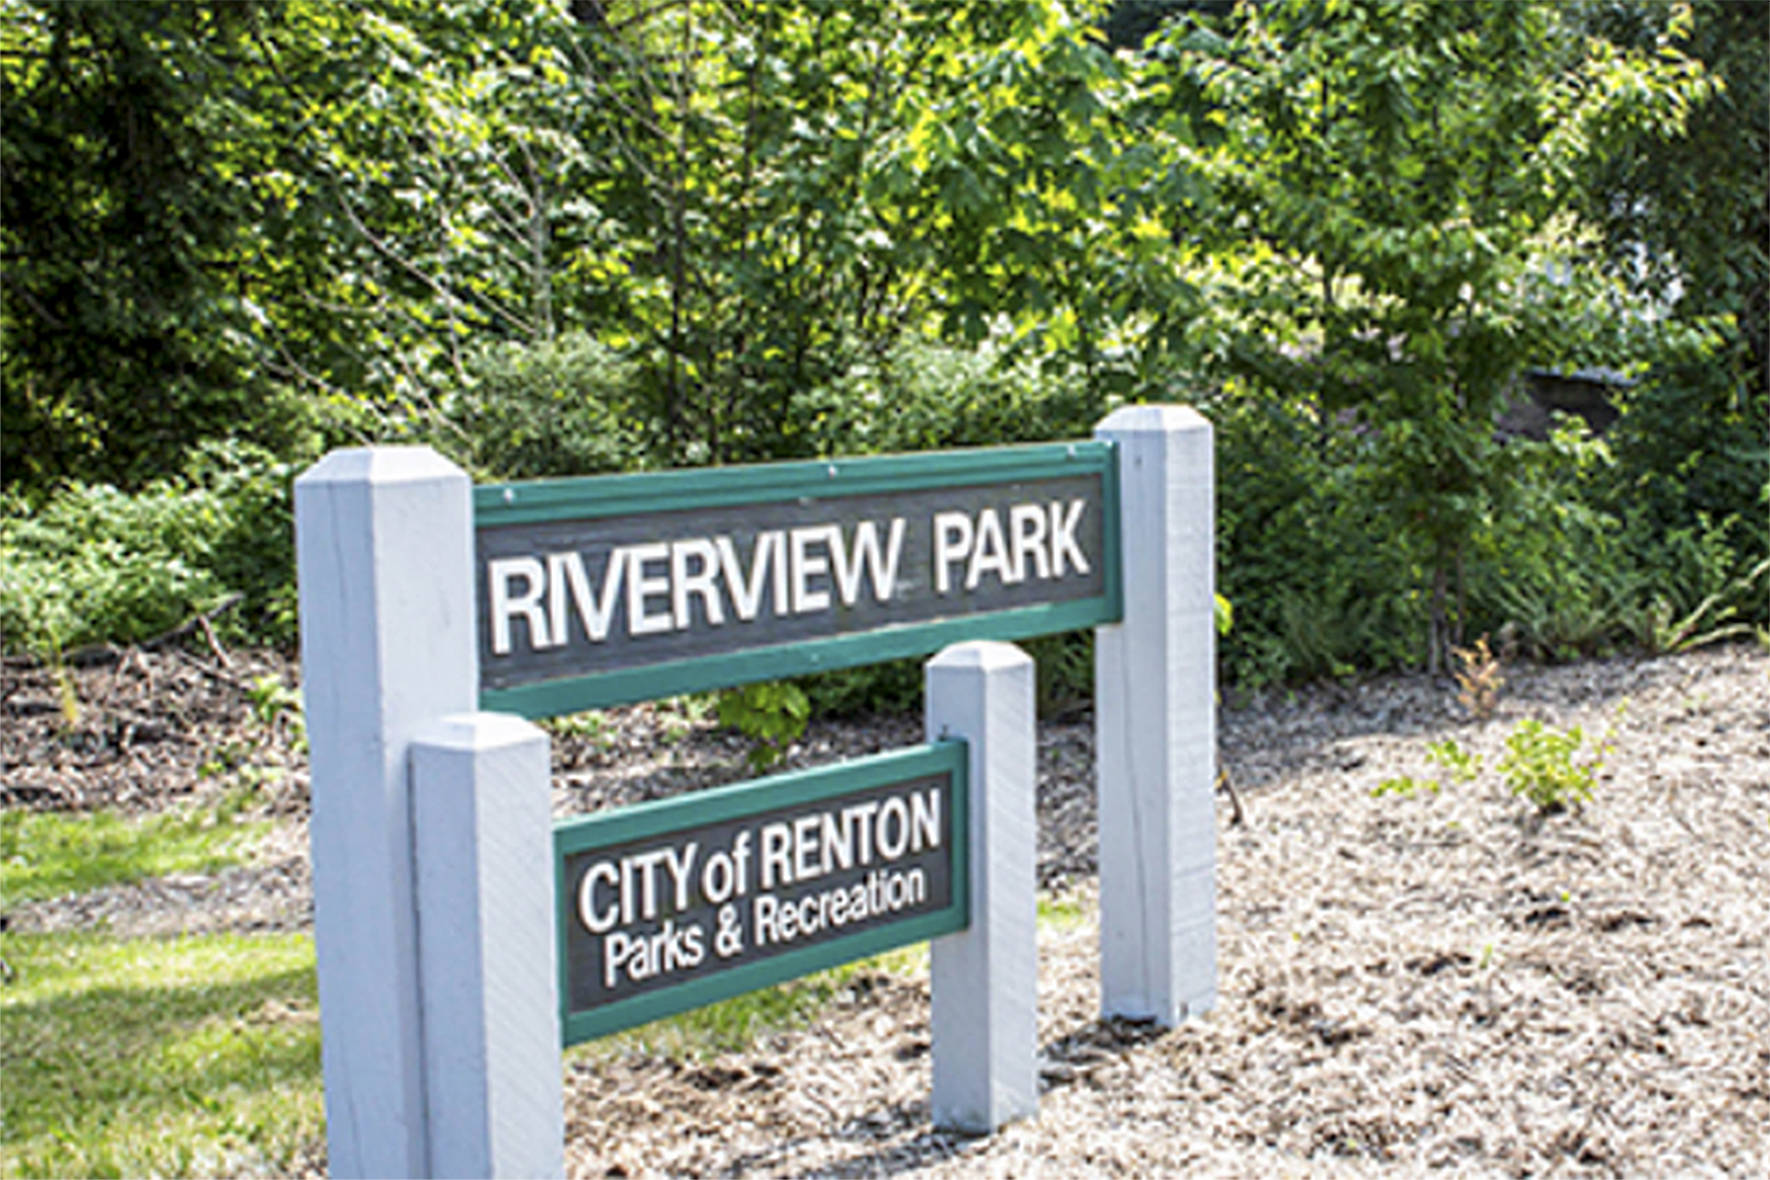 From the city of Renton website. The child had a suspicious injury after spending time on Memorial Day at Riverview Park.